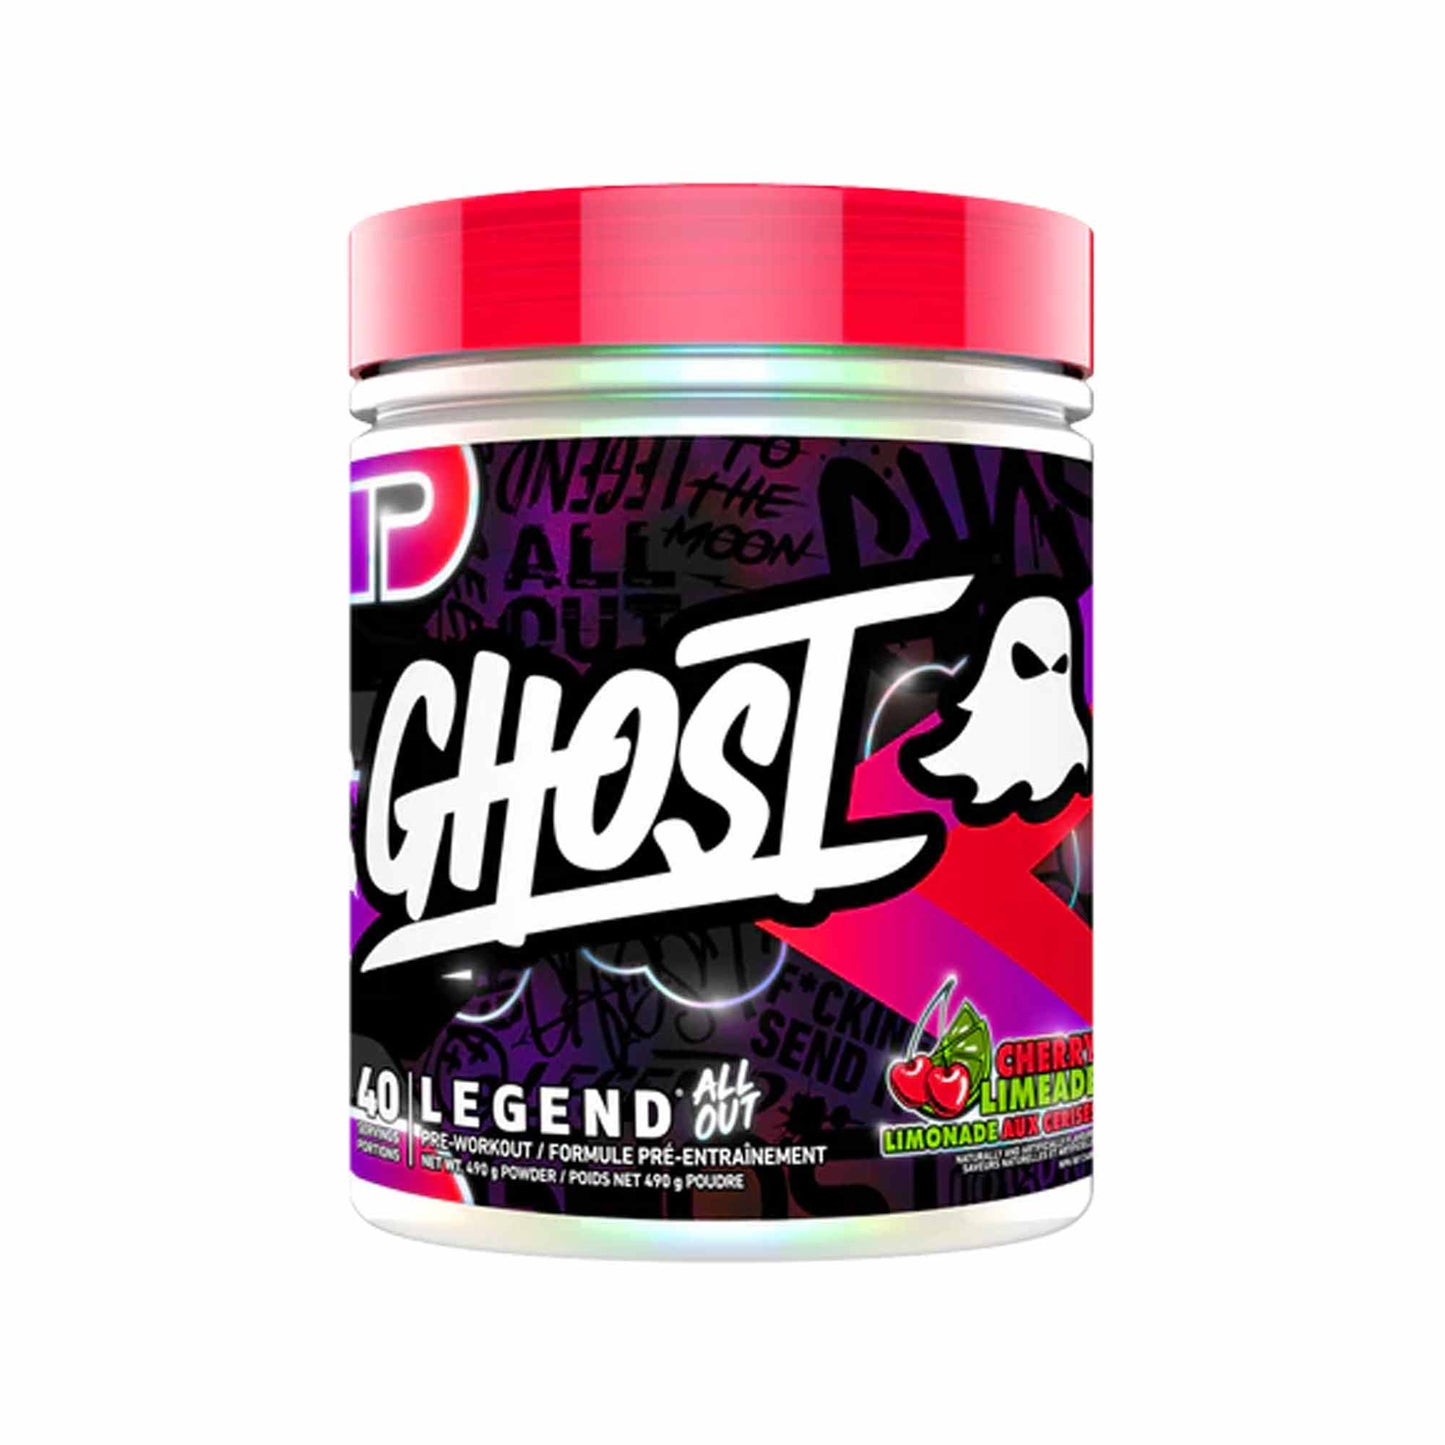 Ghost - Legend All out